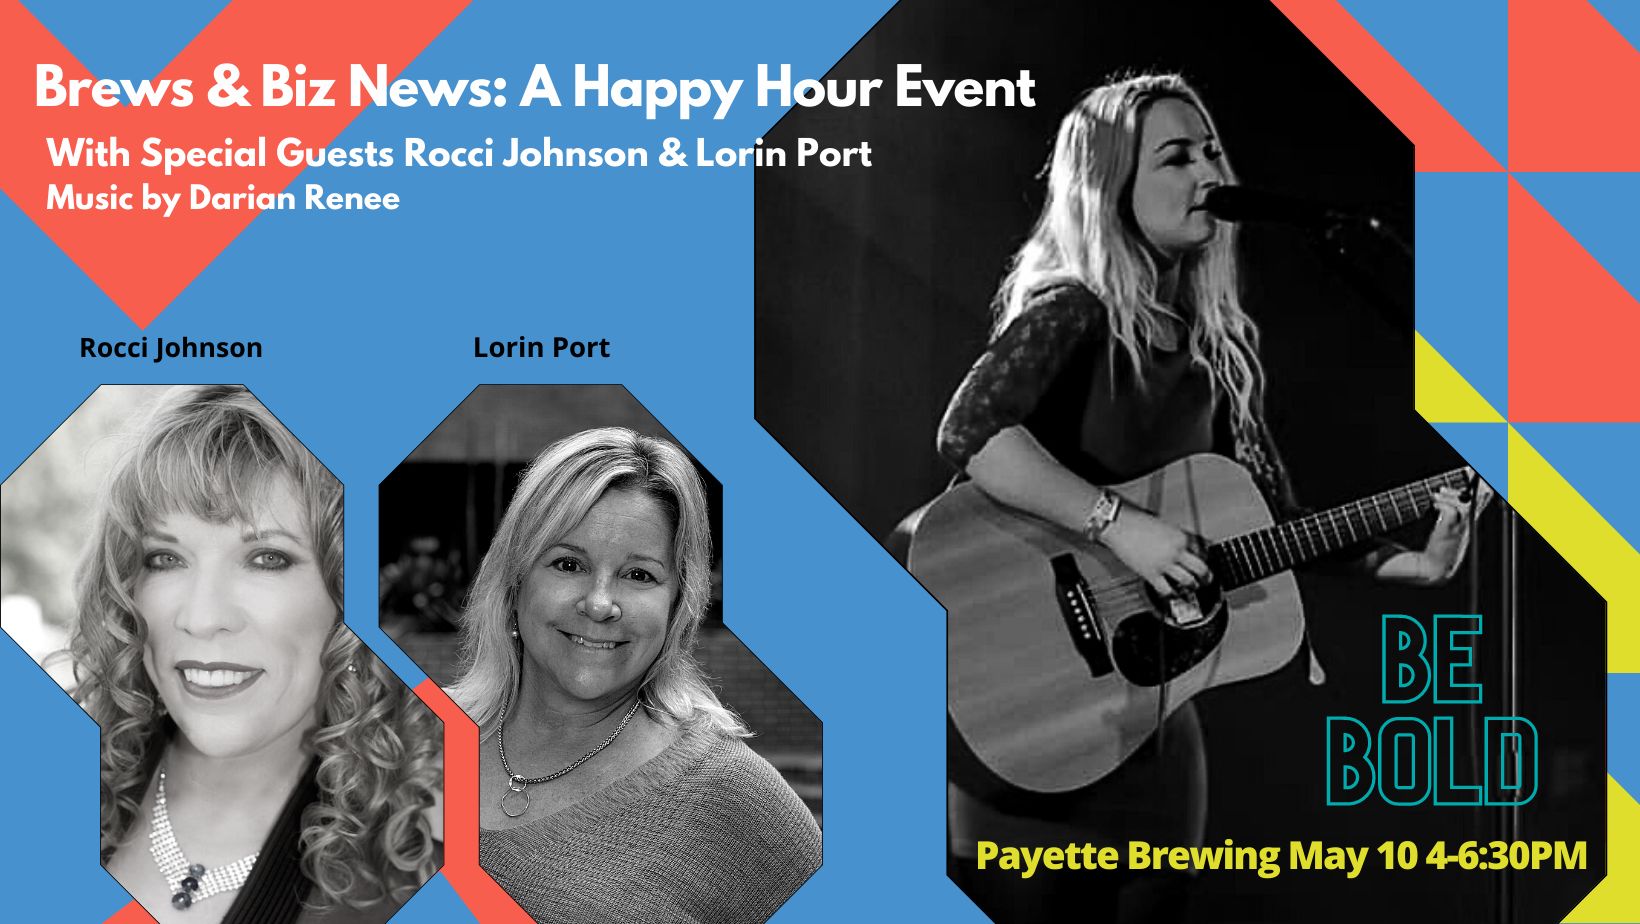 An iWIT Happy Hour Event featuring live music from Darian Renee with special guest Rocci Johnson, Boise, Idaho, United States